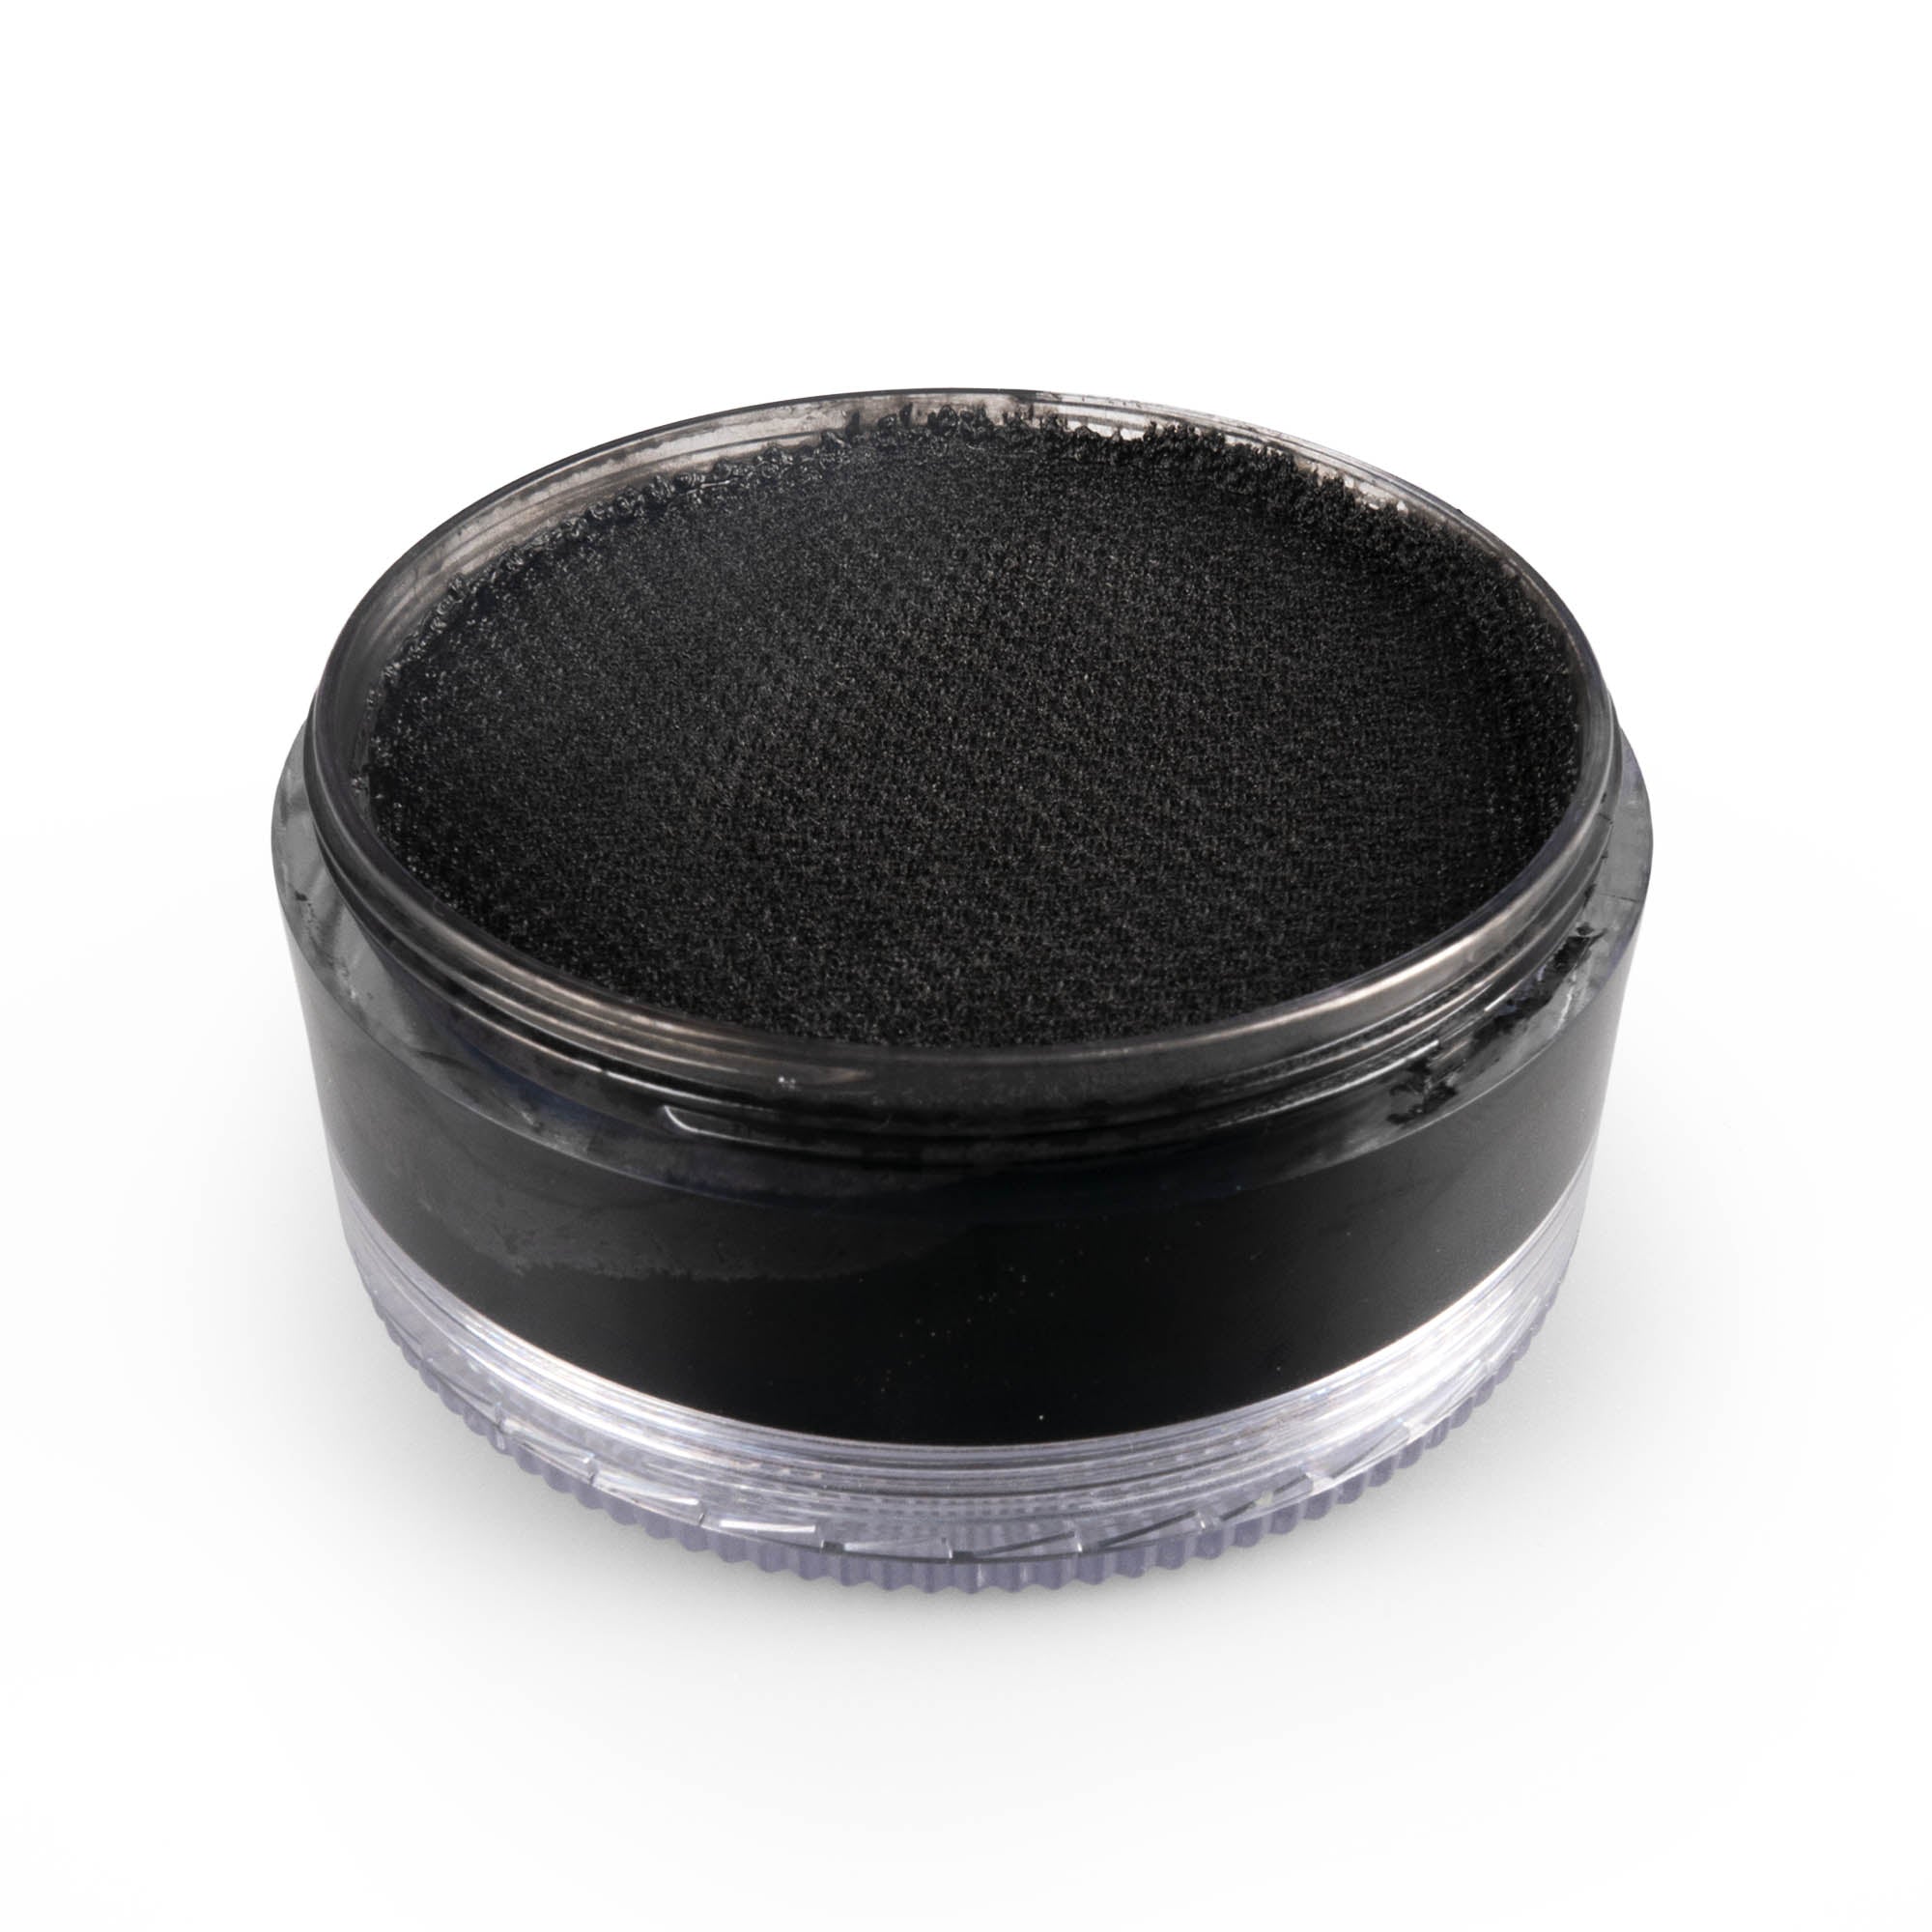 Diamond Fx 90g black face paint with lid off in a white background